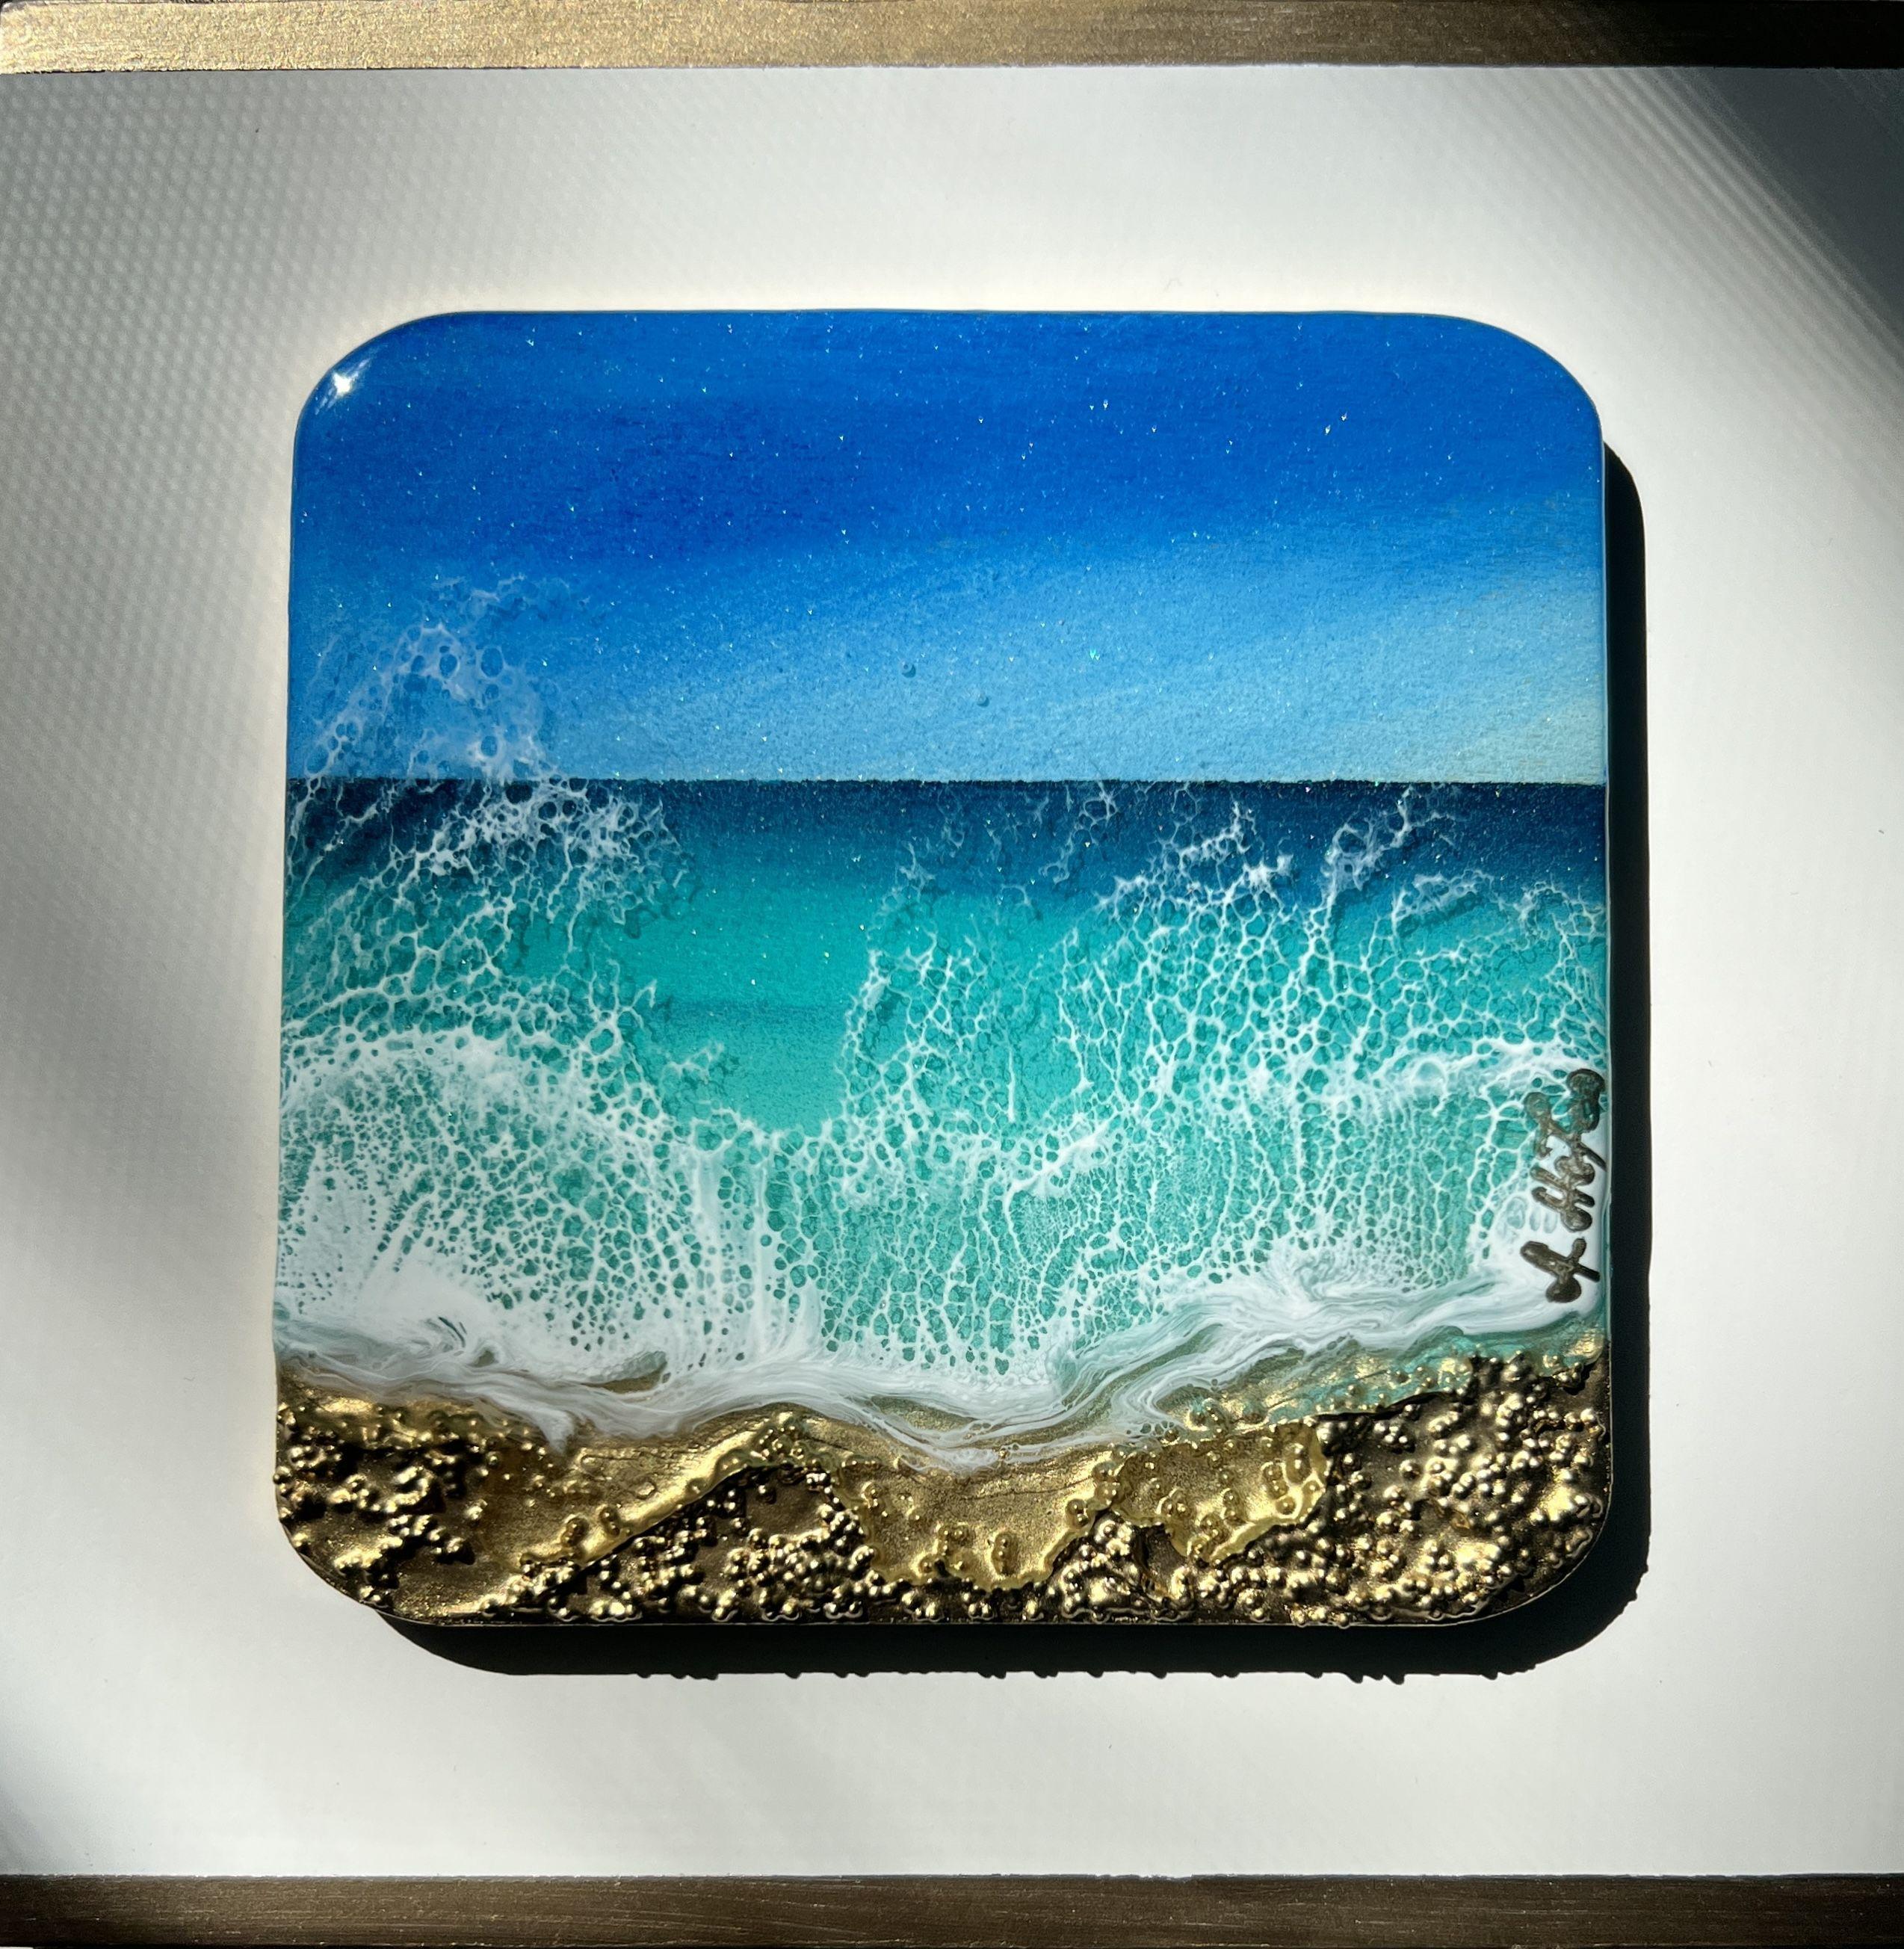 Miniature round ocean painting     Inspired by The Turks And Caicos ocean colors  Different shades of blue tones, turquoise, teal, aqua, gold and white  This painting does not need to be framed, the painted image extends over the sides, it is wired,